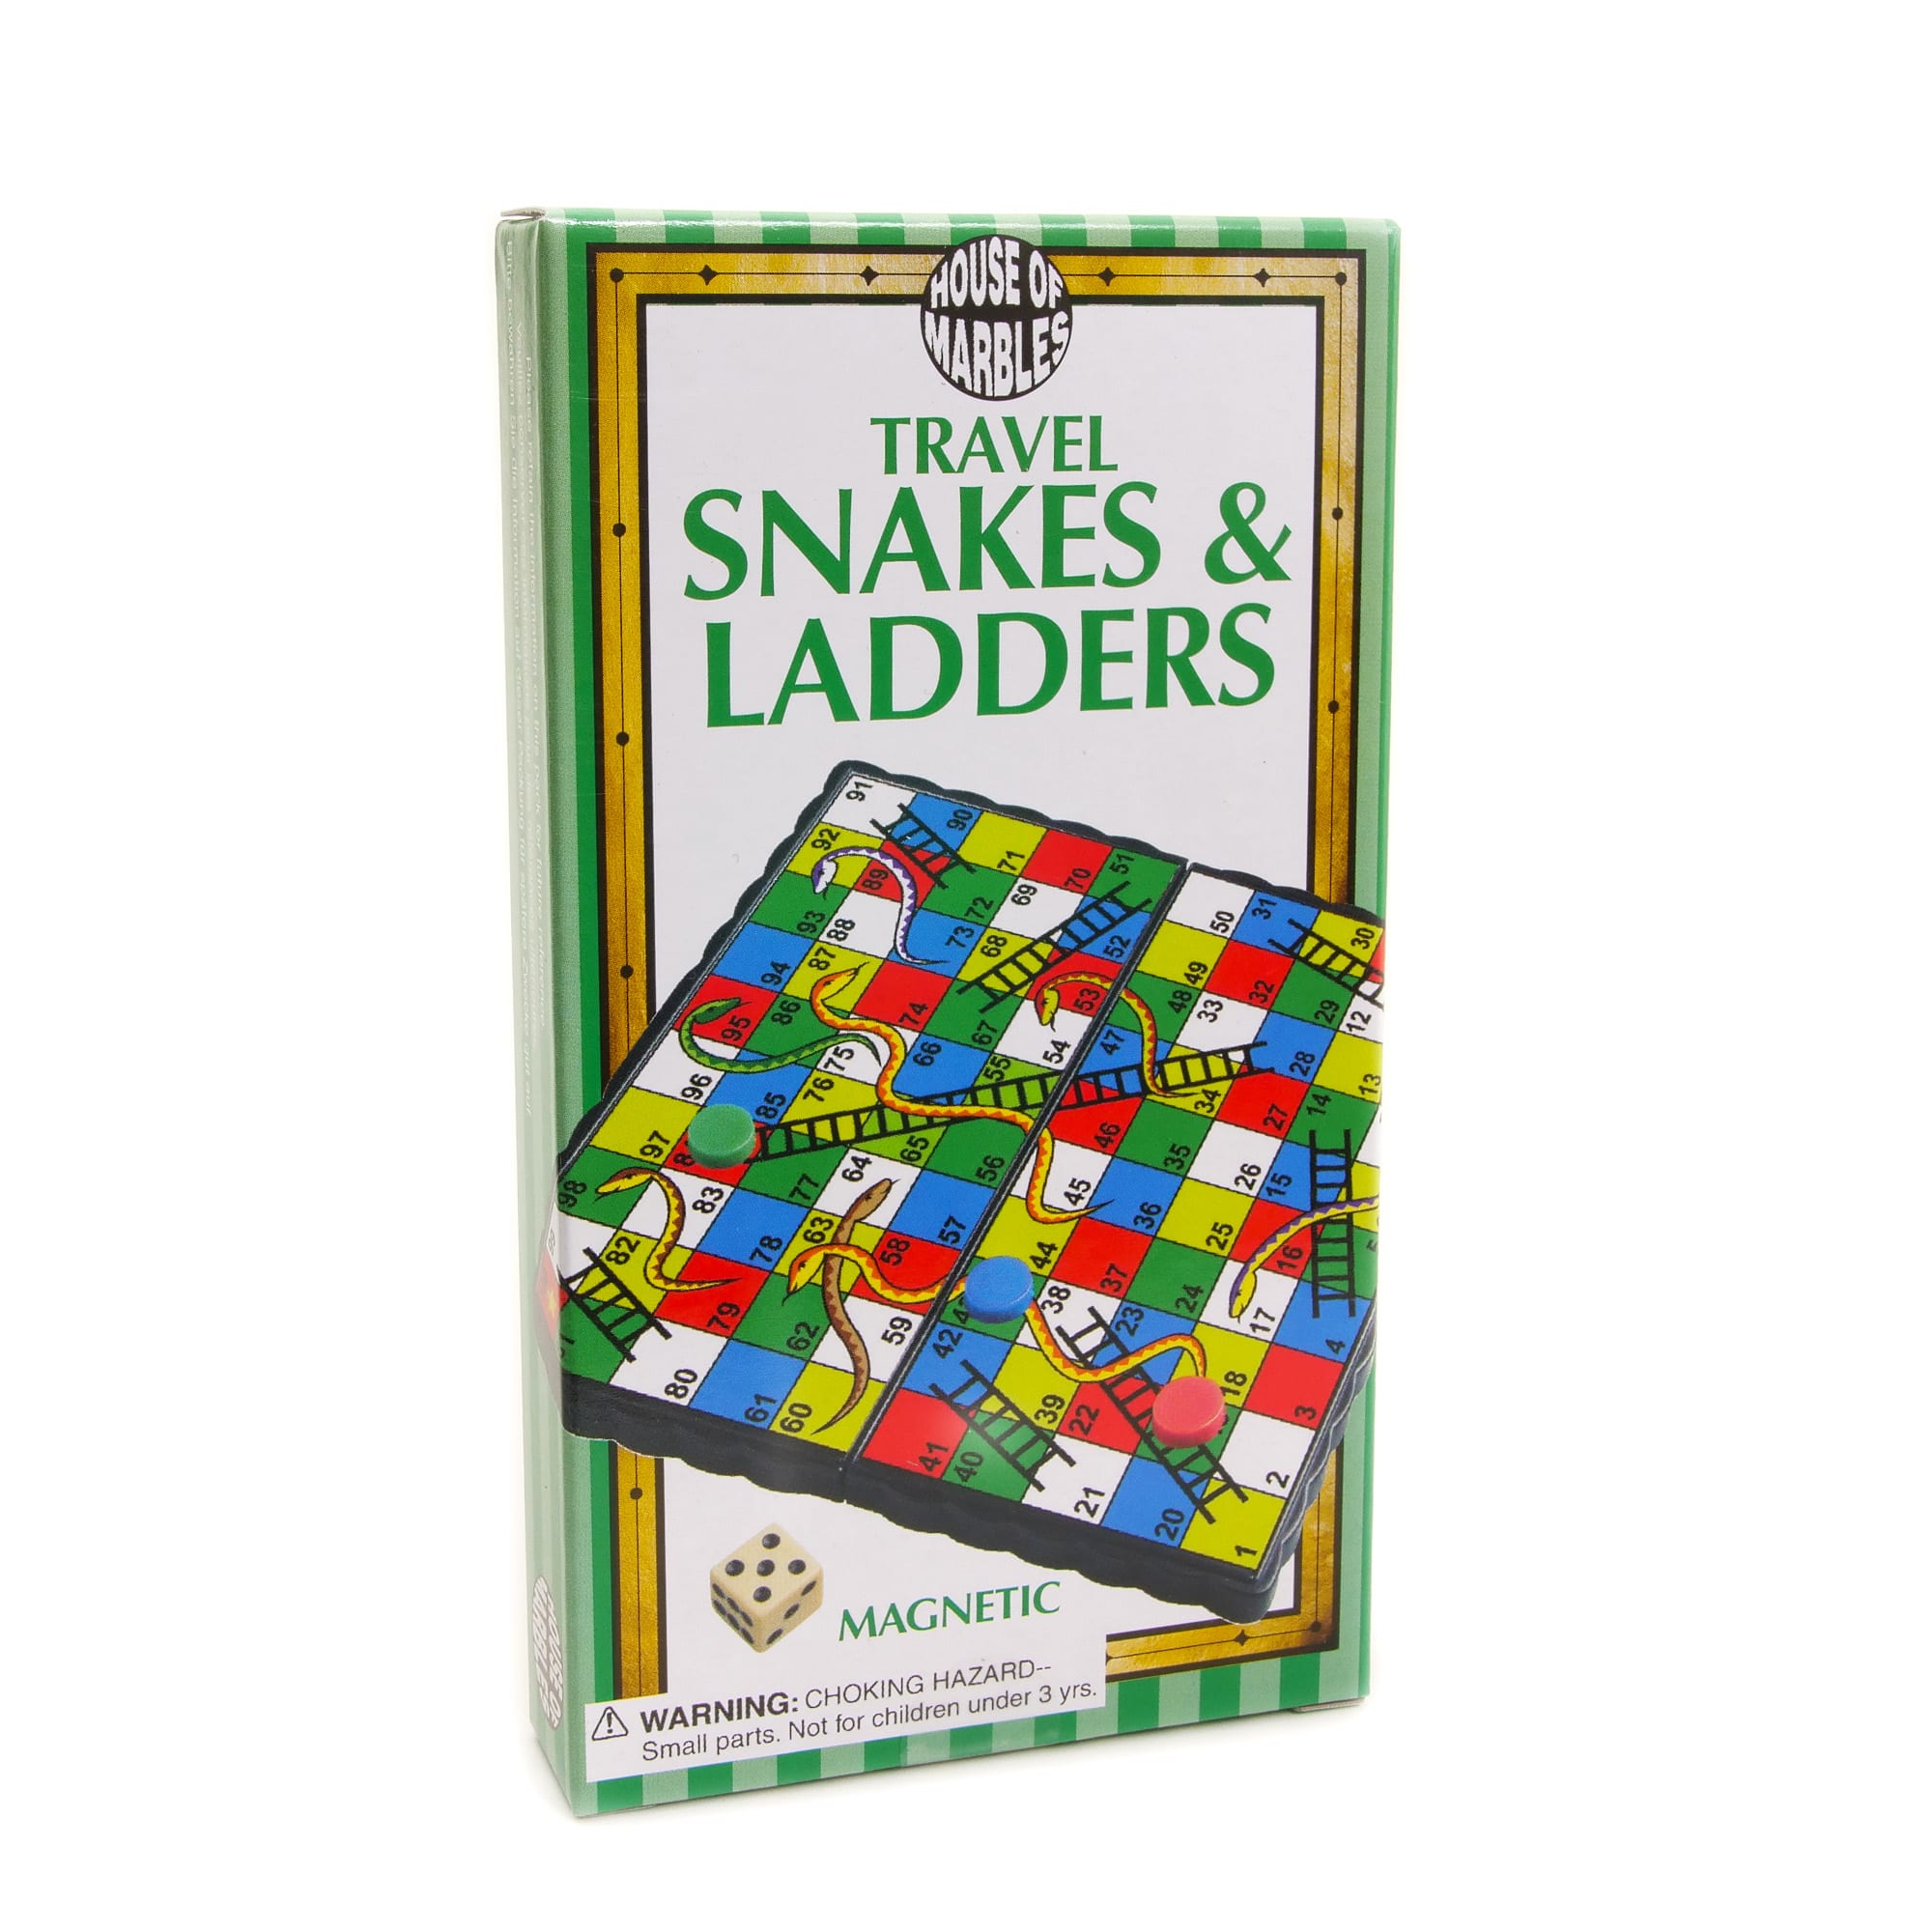 SNAKES AND LADDERS MINI BOARD GAMES PARTY BAG FILLERS BOY AND GIRLS 